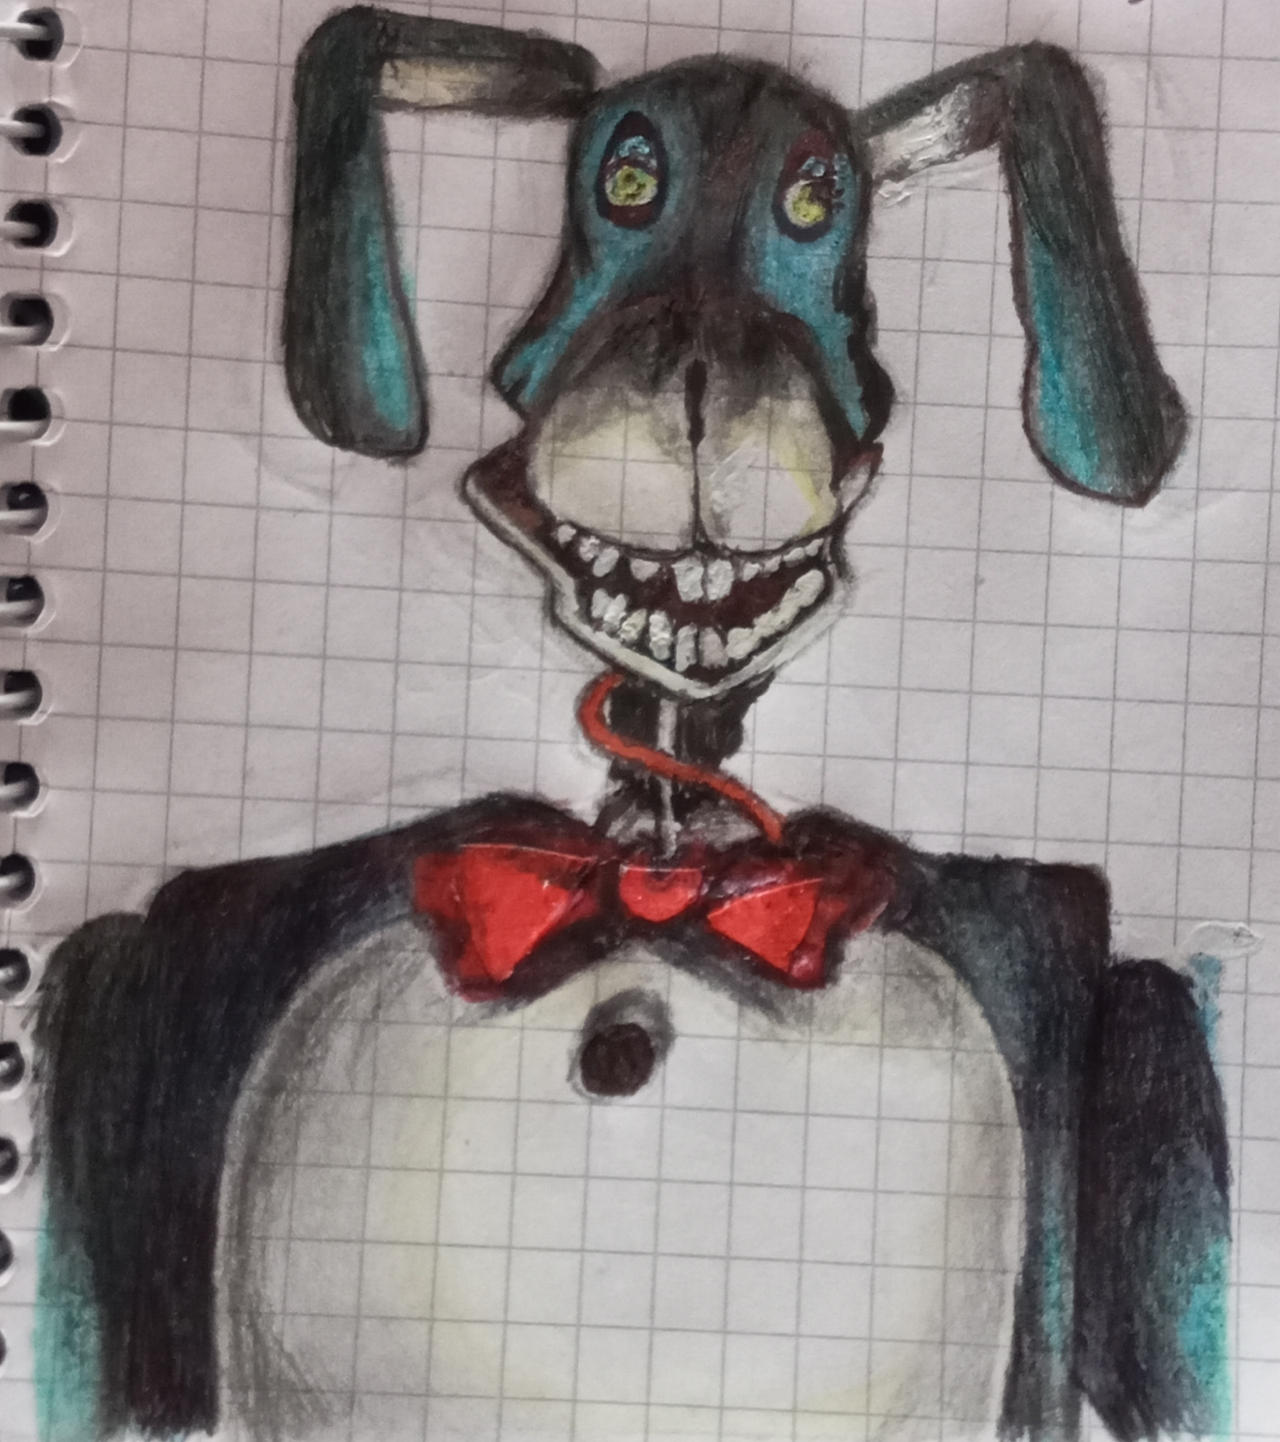 I tried to draw Bon from The Walten Files by 07User on DeviantArt